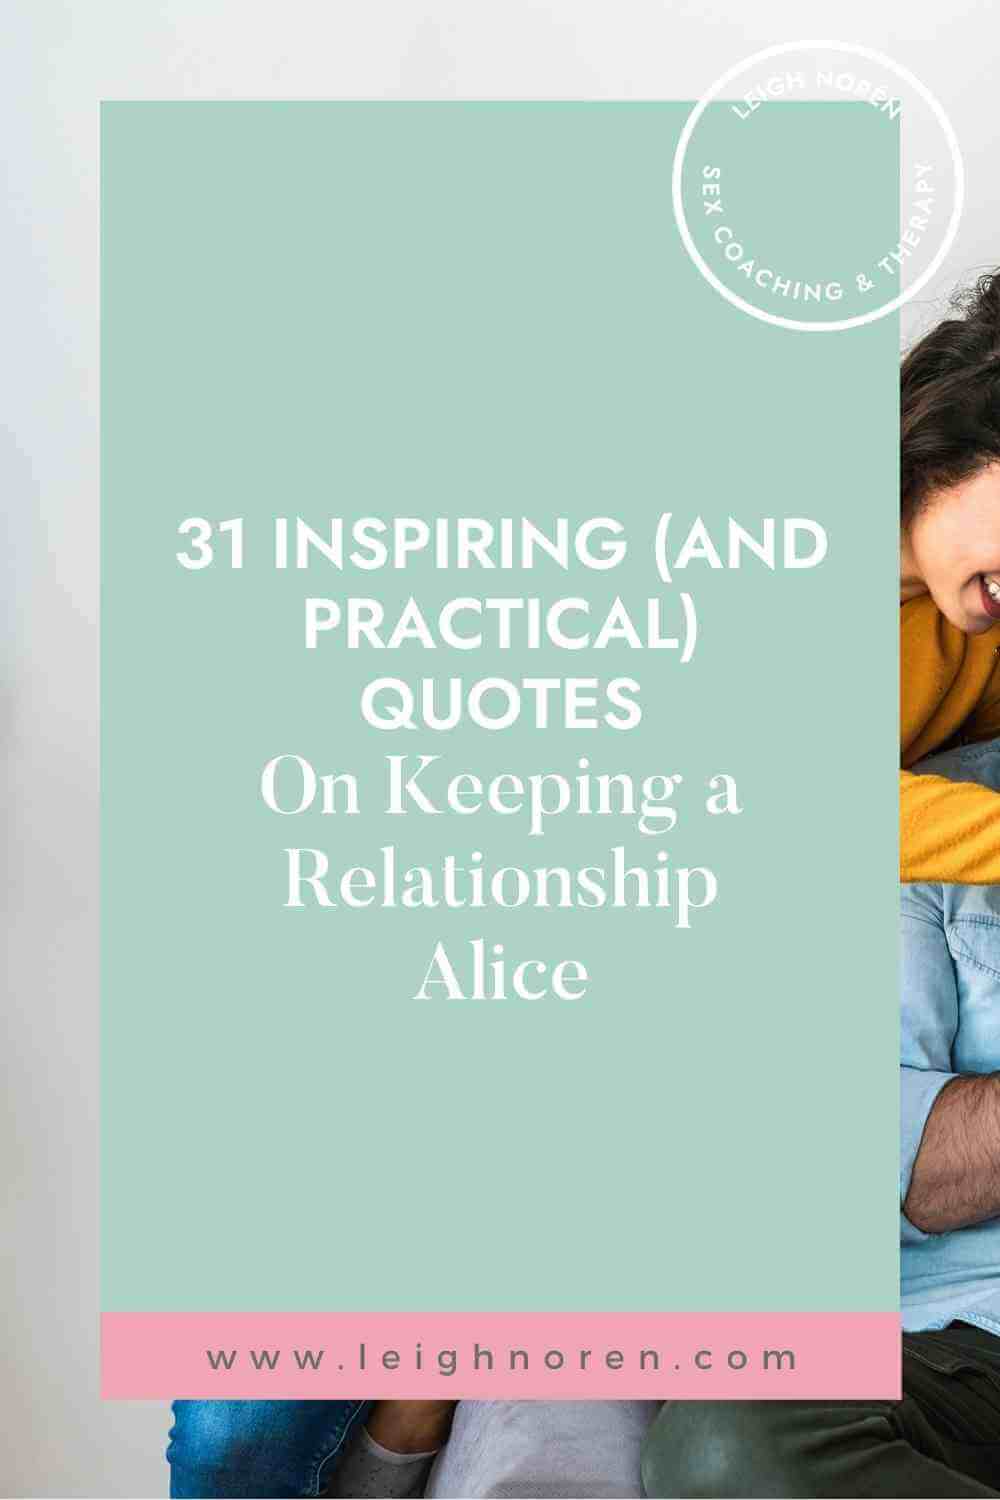 31 Inspiring (And Practical) Quotes On Keeping A Relationship Alive